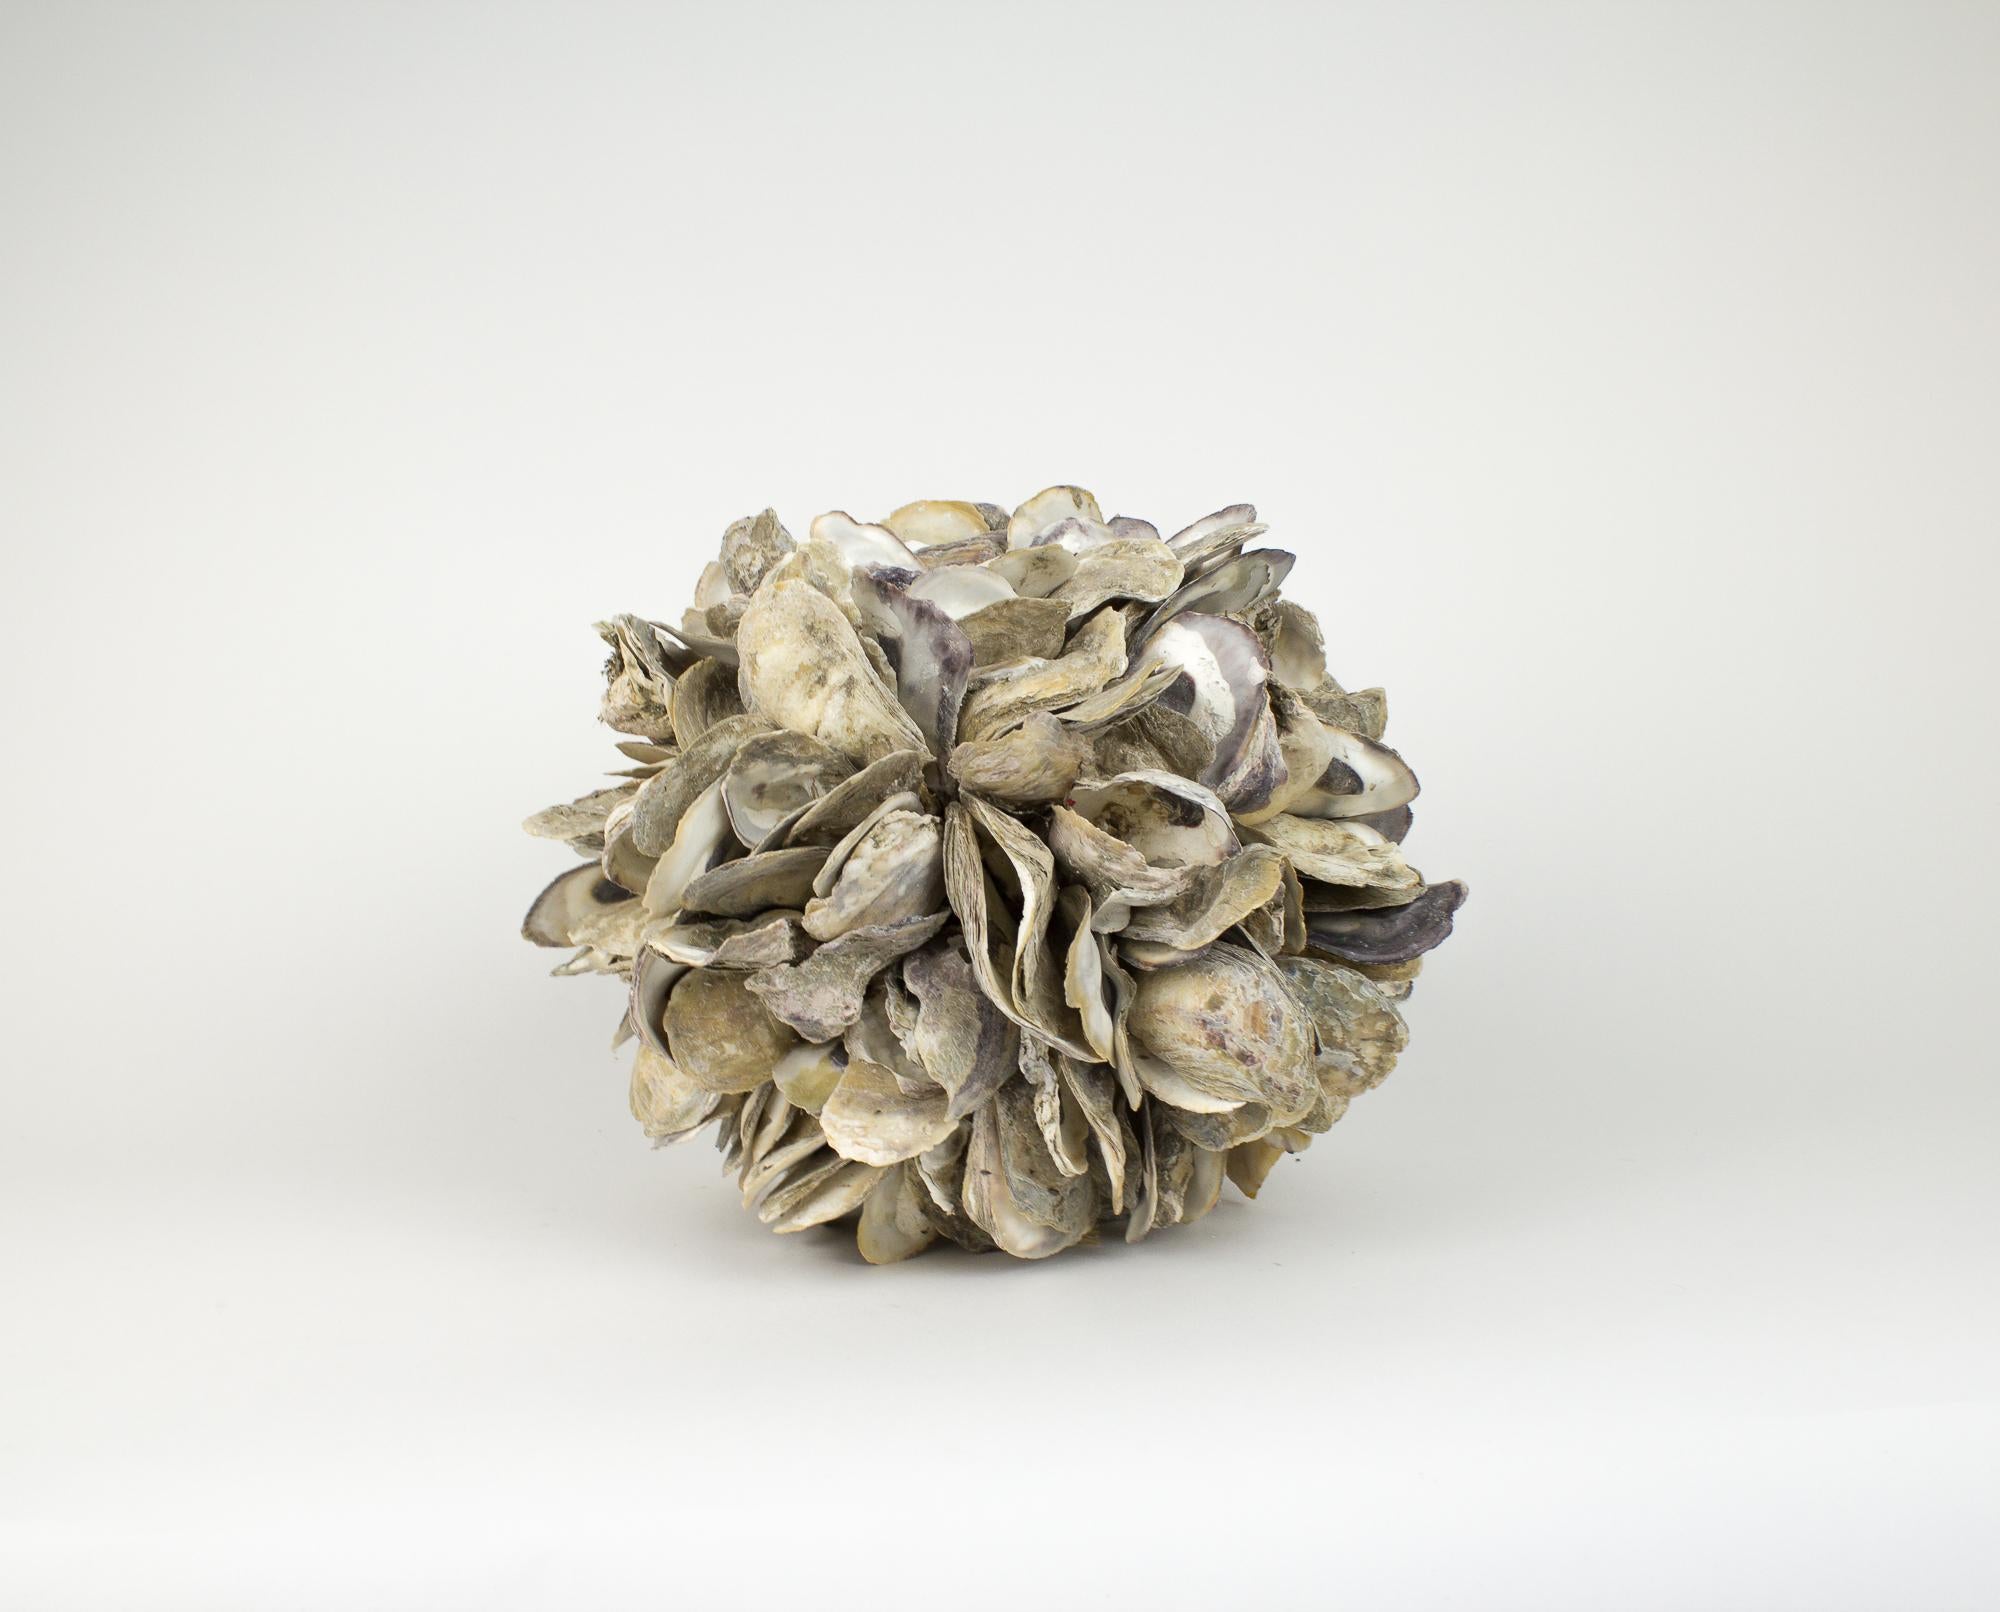 Large sphere sculpture made of natural oyster shells. Each shell is strung together with rope to creature a round shape. Natural texture and neutral colors will add texture to any sea or nautical themed room. Perfect size for large coffee table or